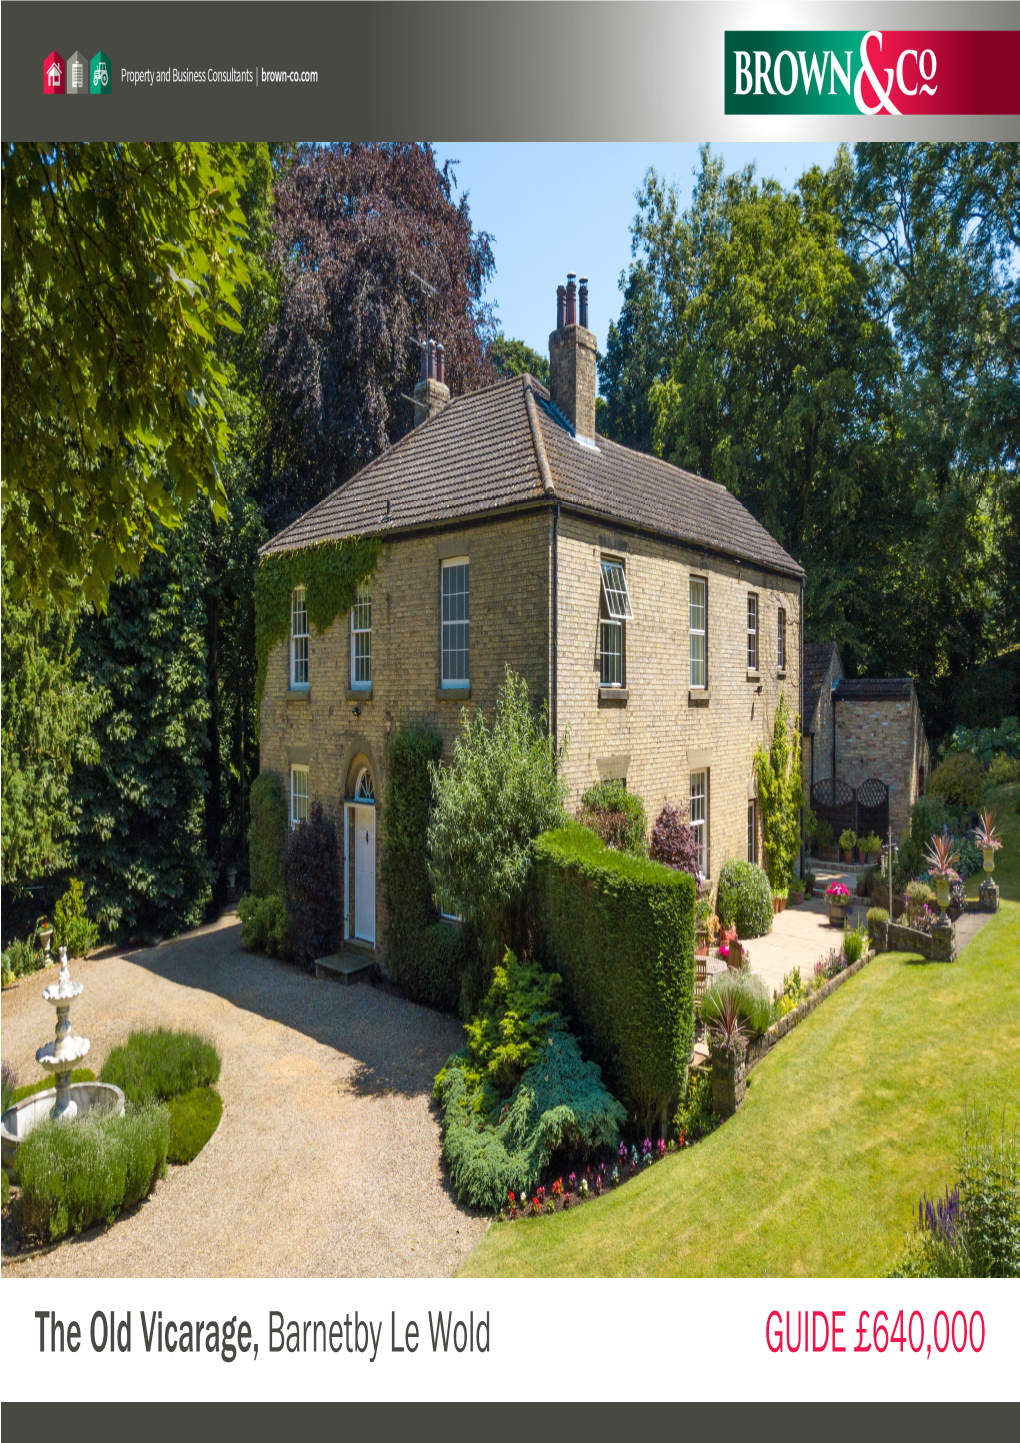 GUIDE £640,000 the Old Vicarage, Barnetby Le Wold